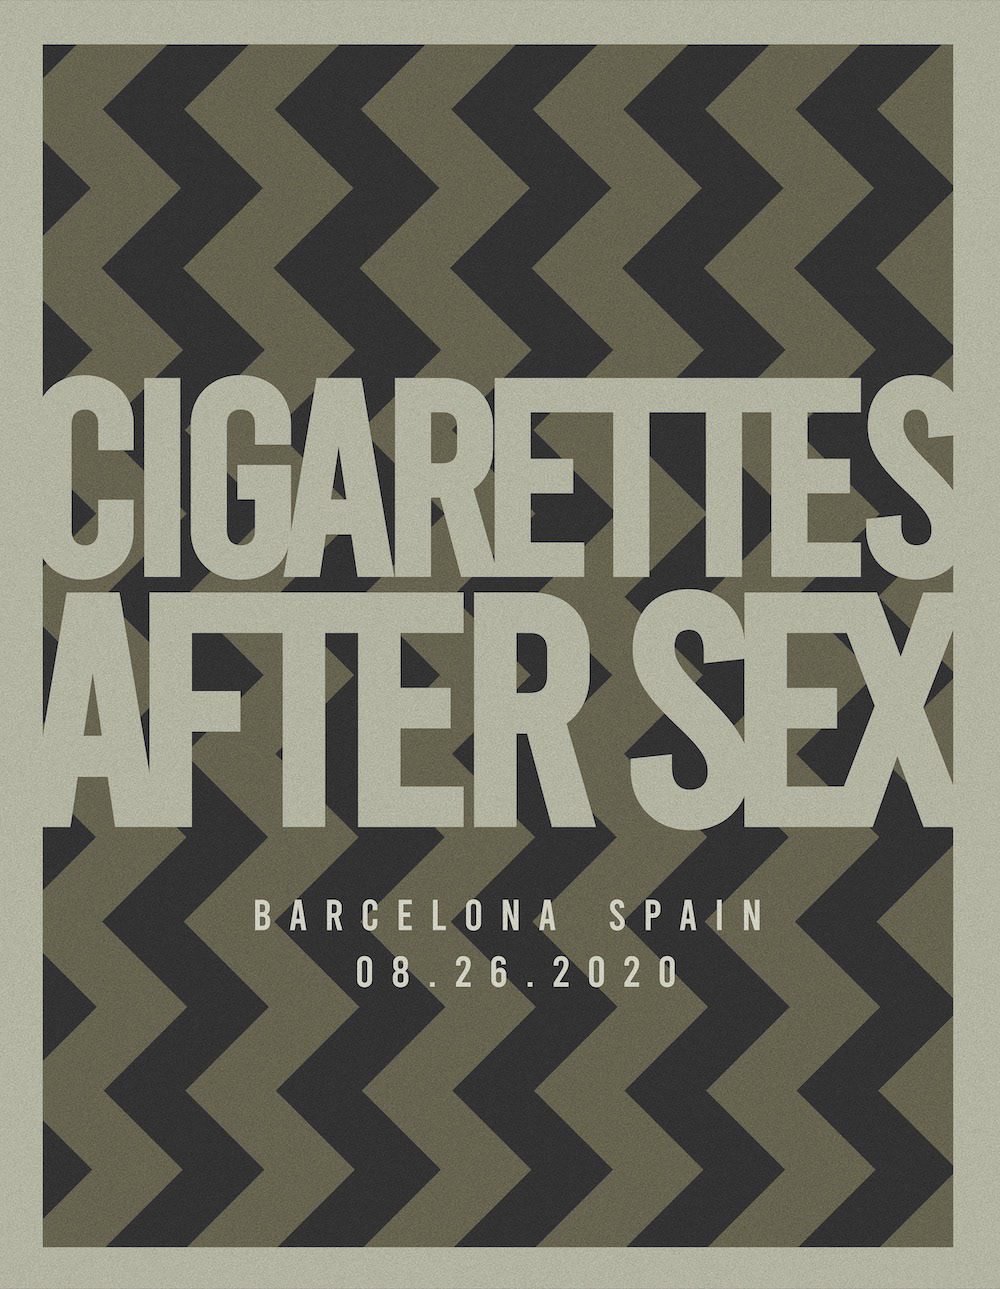 abstract cigarettes after sex concert ILLUSTRATION  typography  